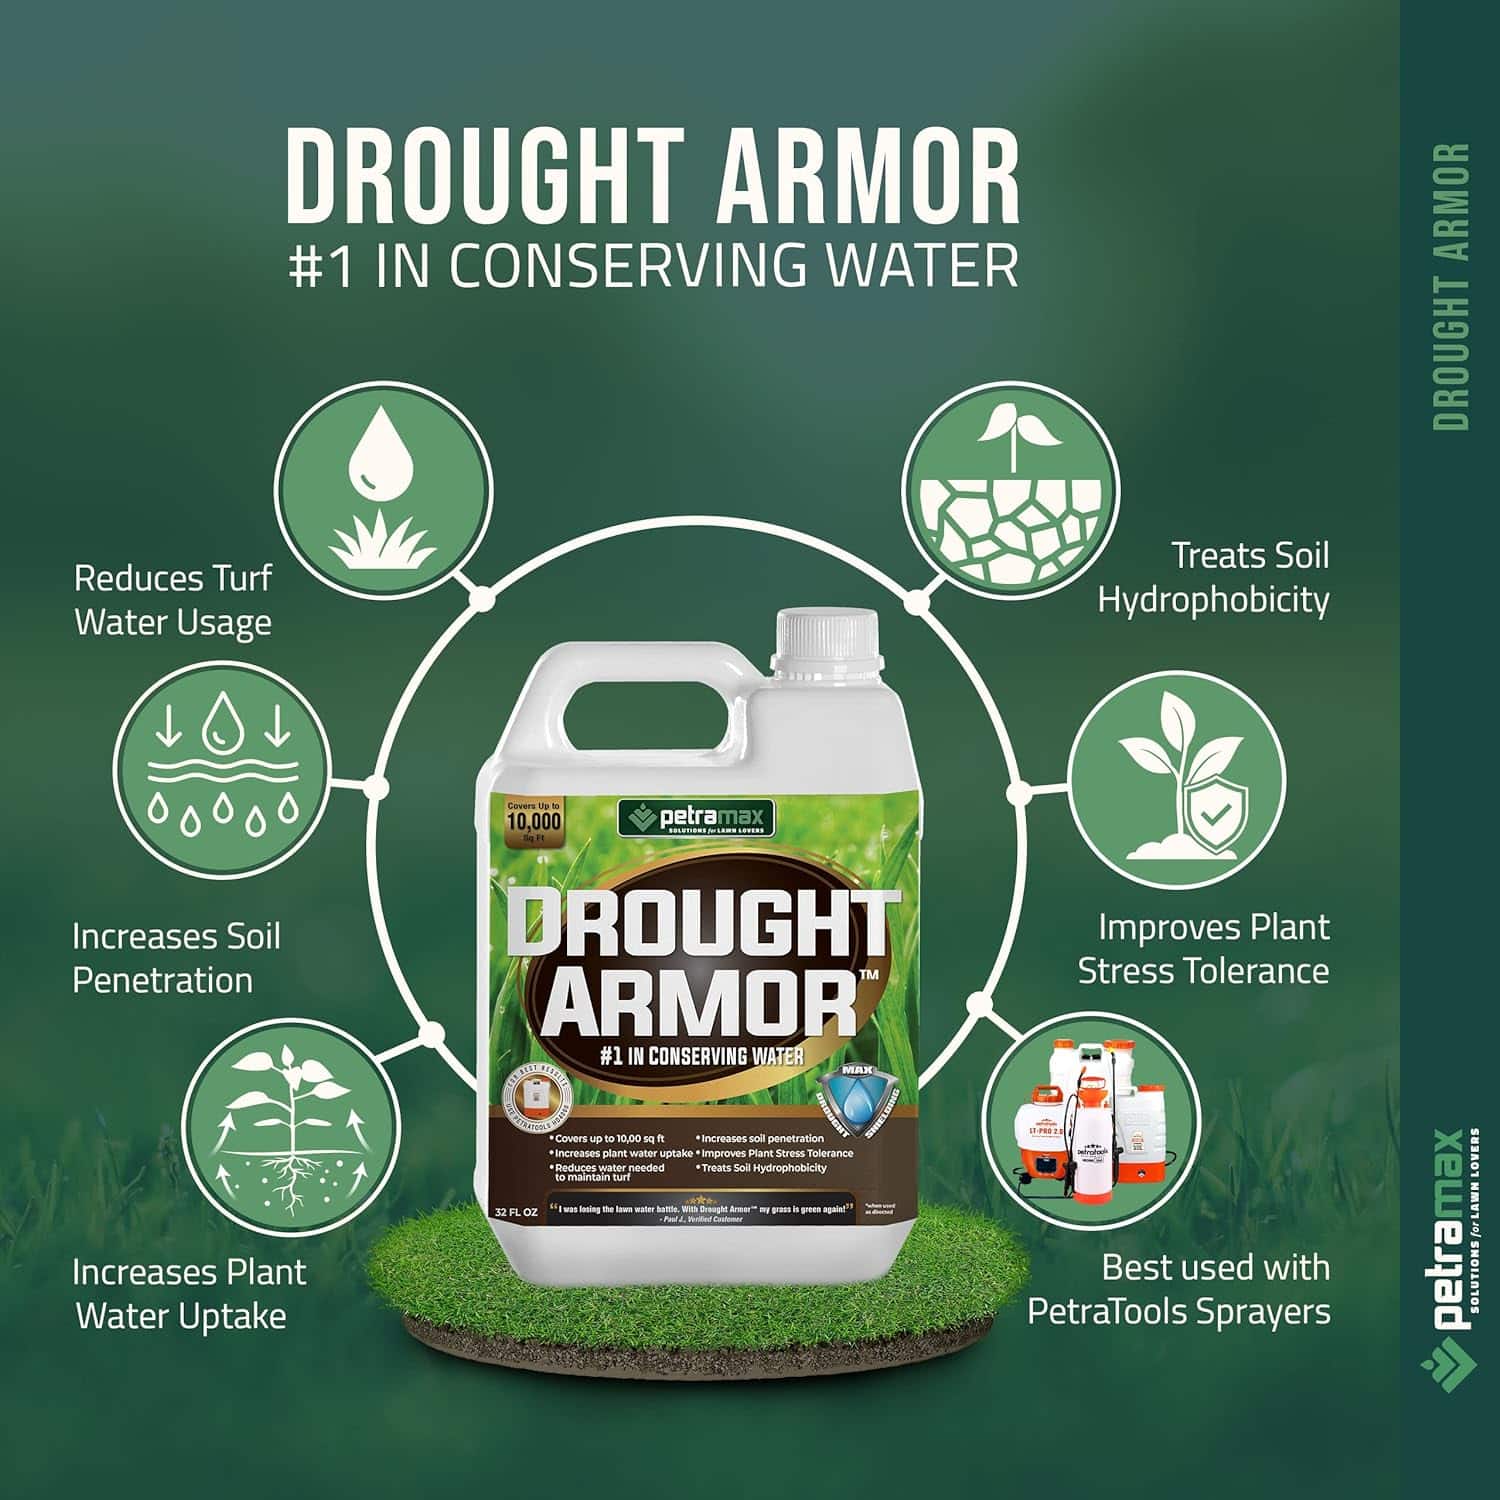 Transform Your Lawn with PetraMax Lawn & Turf Drought Armor: The Ultimate Drought Defense